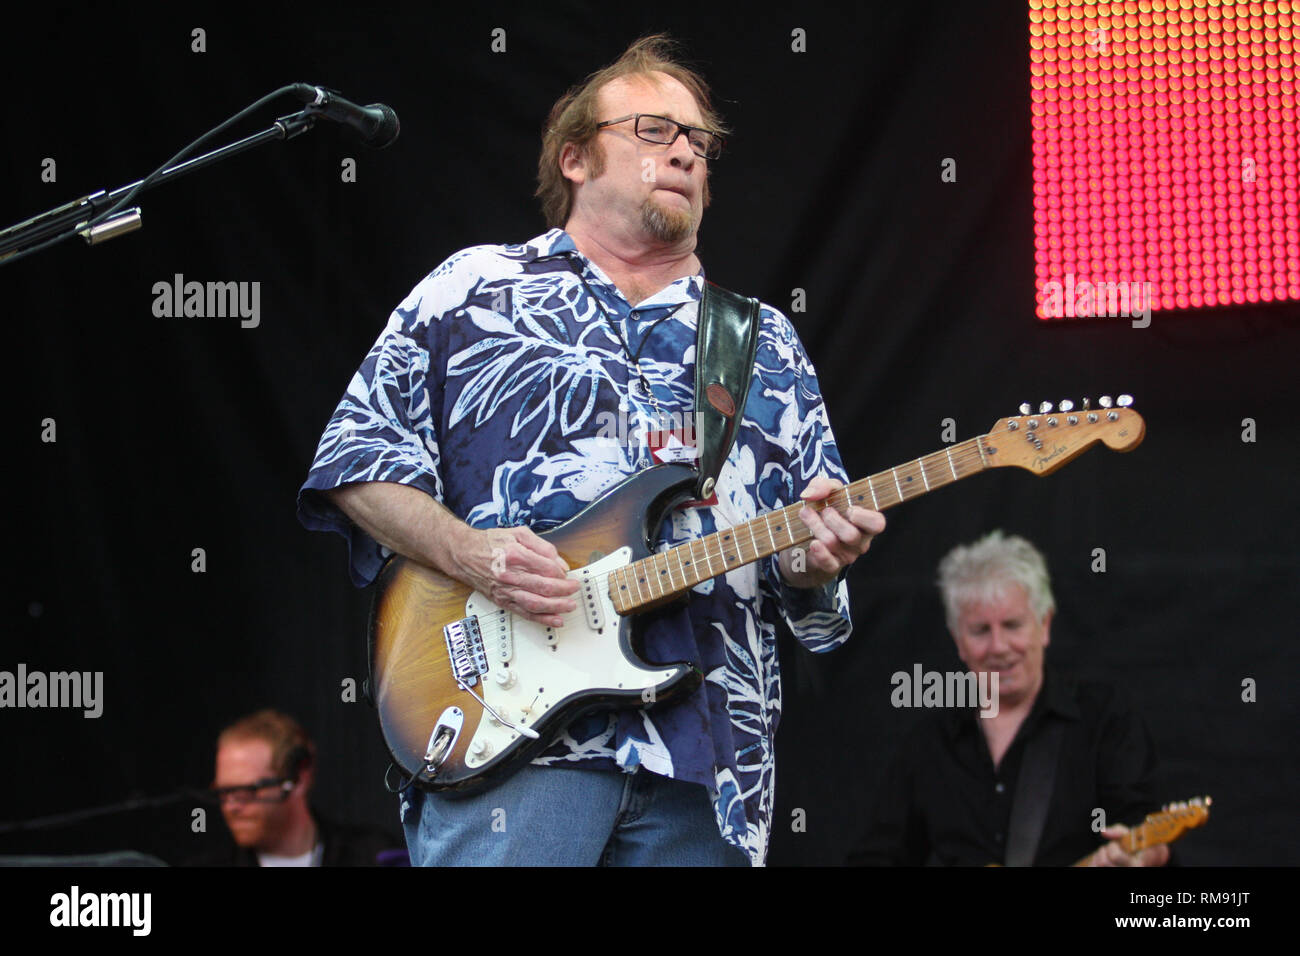 Singer, songwriter and guitarist Stephen Stilla is shown performing on ...